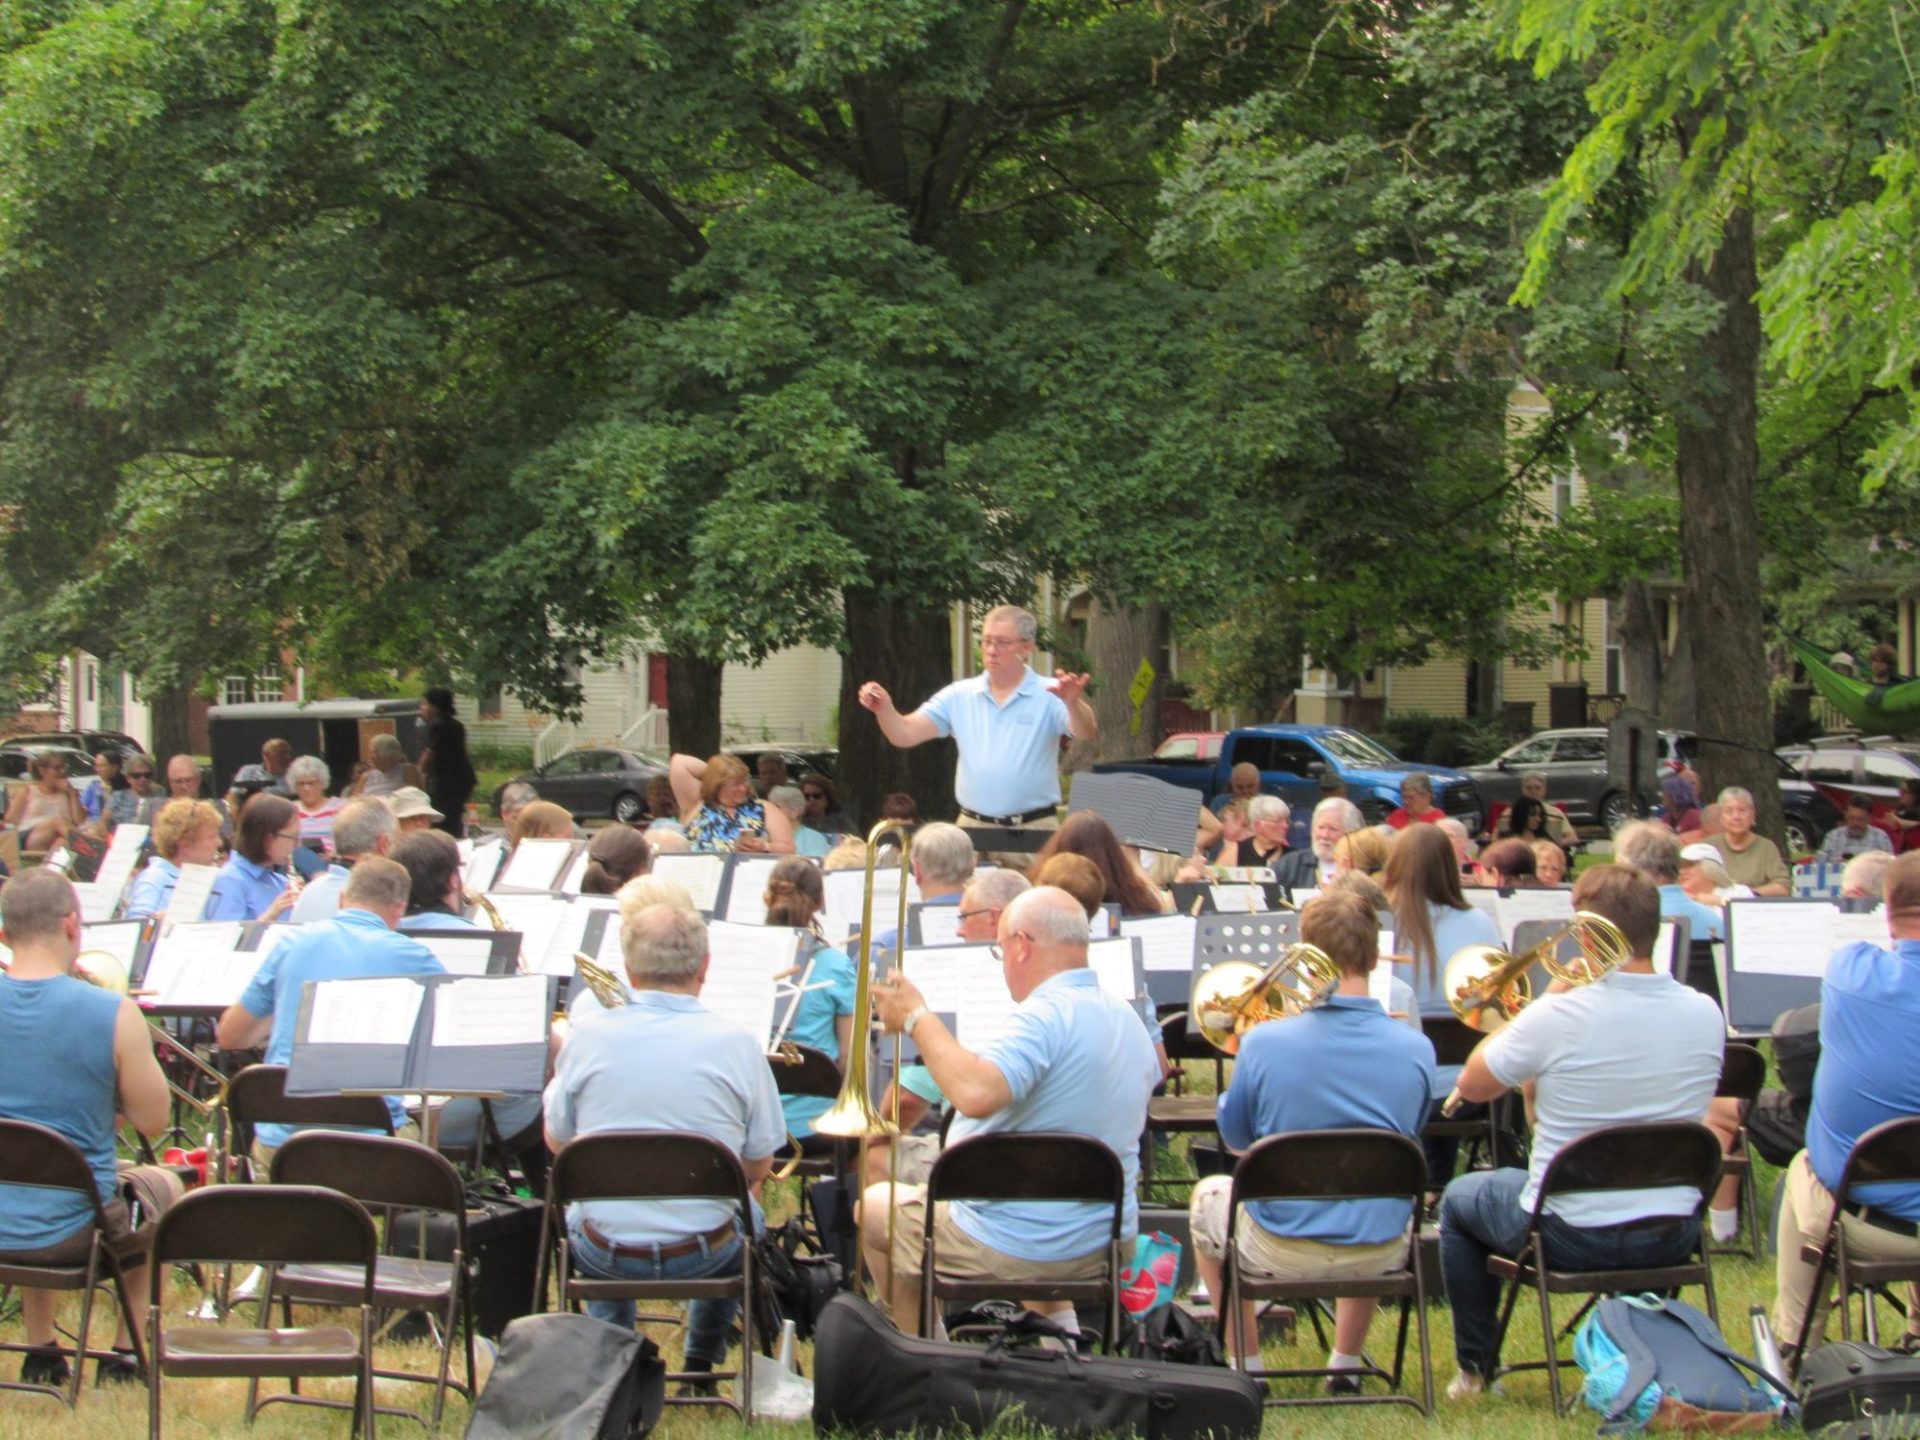 A concert band arranged in folding chairs in a park. The musicians are all wearing light blue shirts. A white man, also in a light blue shirt, is standing in front conducting.